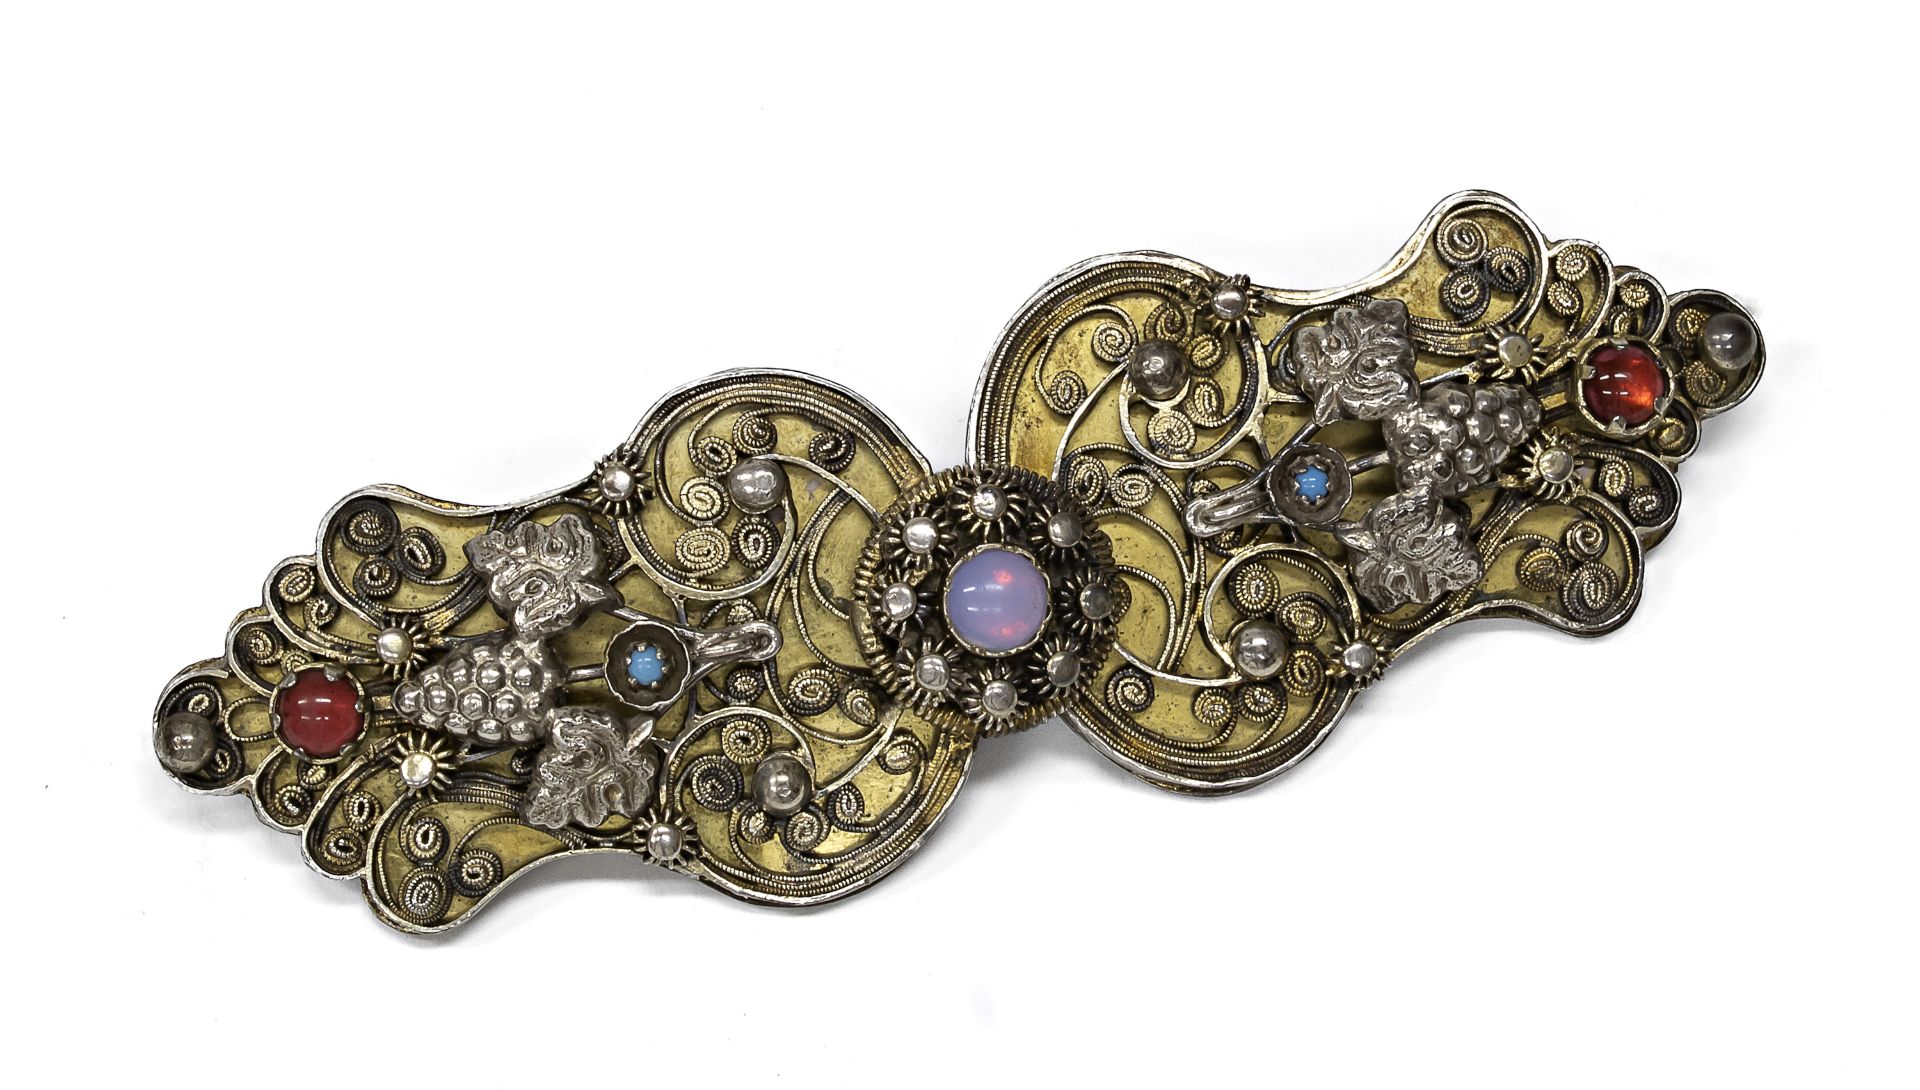 GILDED SILVER BUCKLE AUSTRIA FIRST HALF OF THE 19TH CENTURY